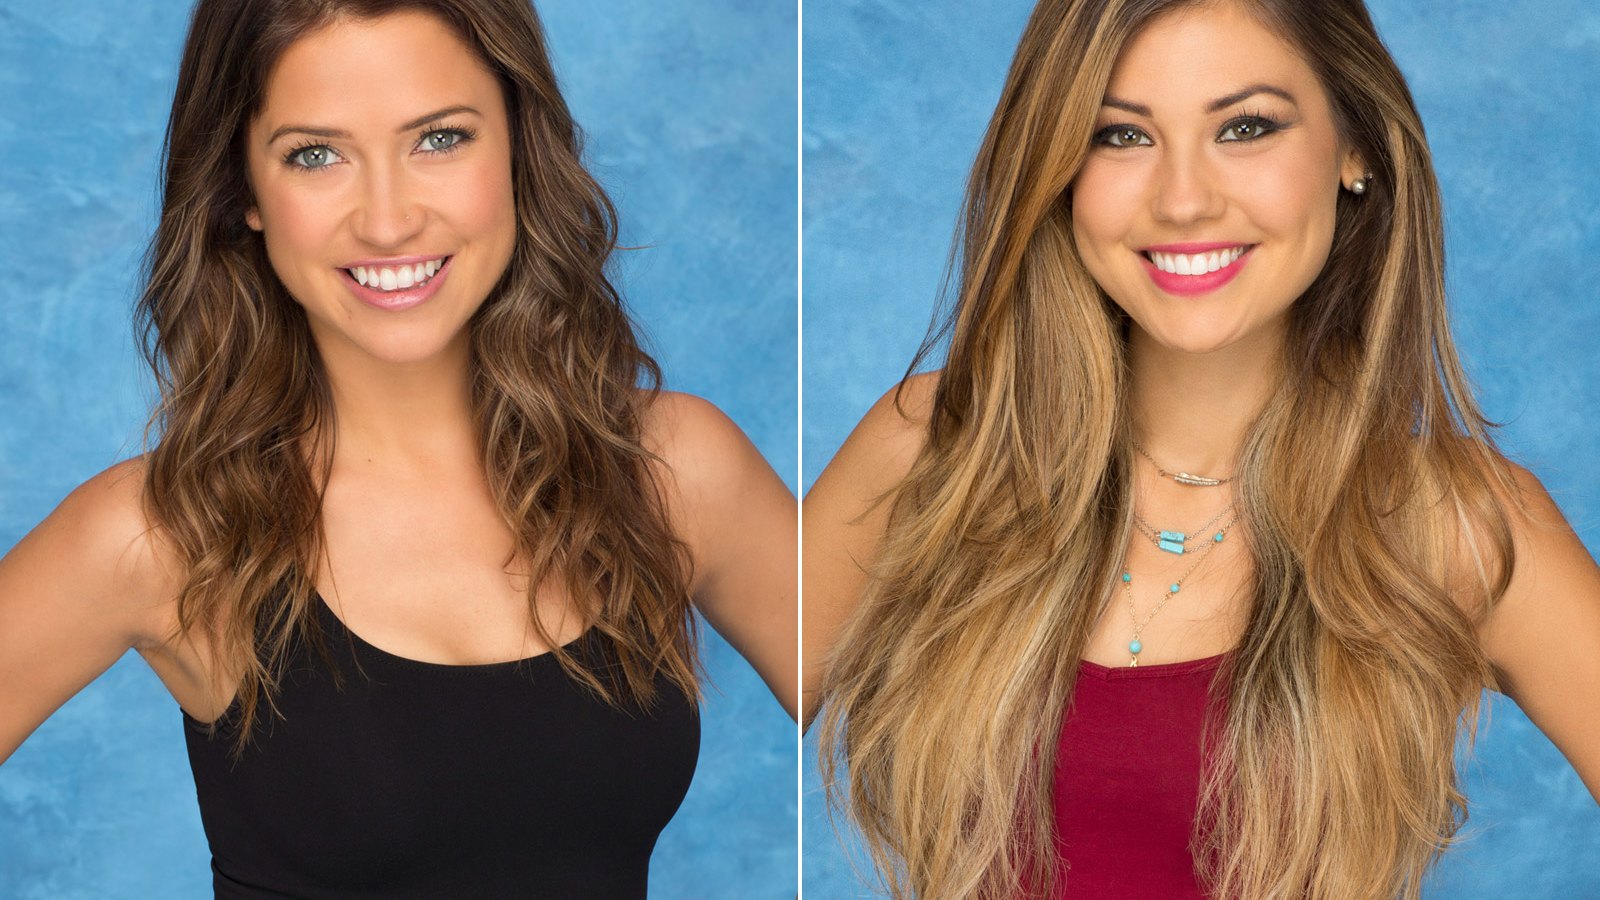 The Bachelorette 11 Will Be Kaitlyn Bristowe And Britt Nilsson